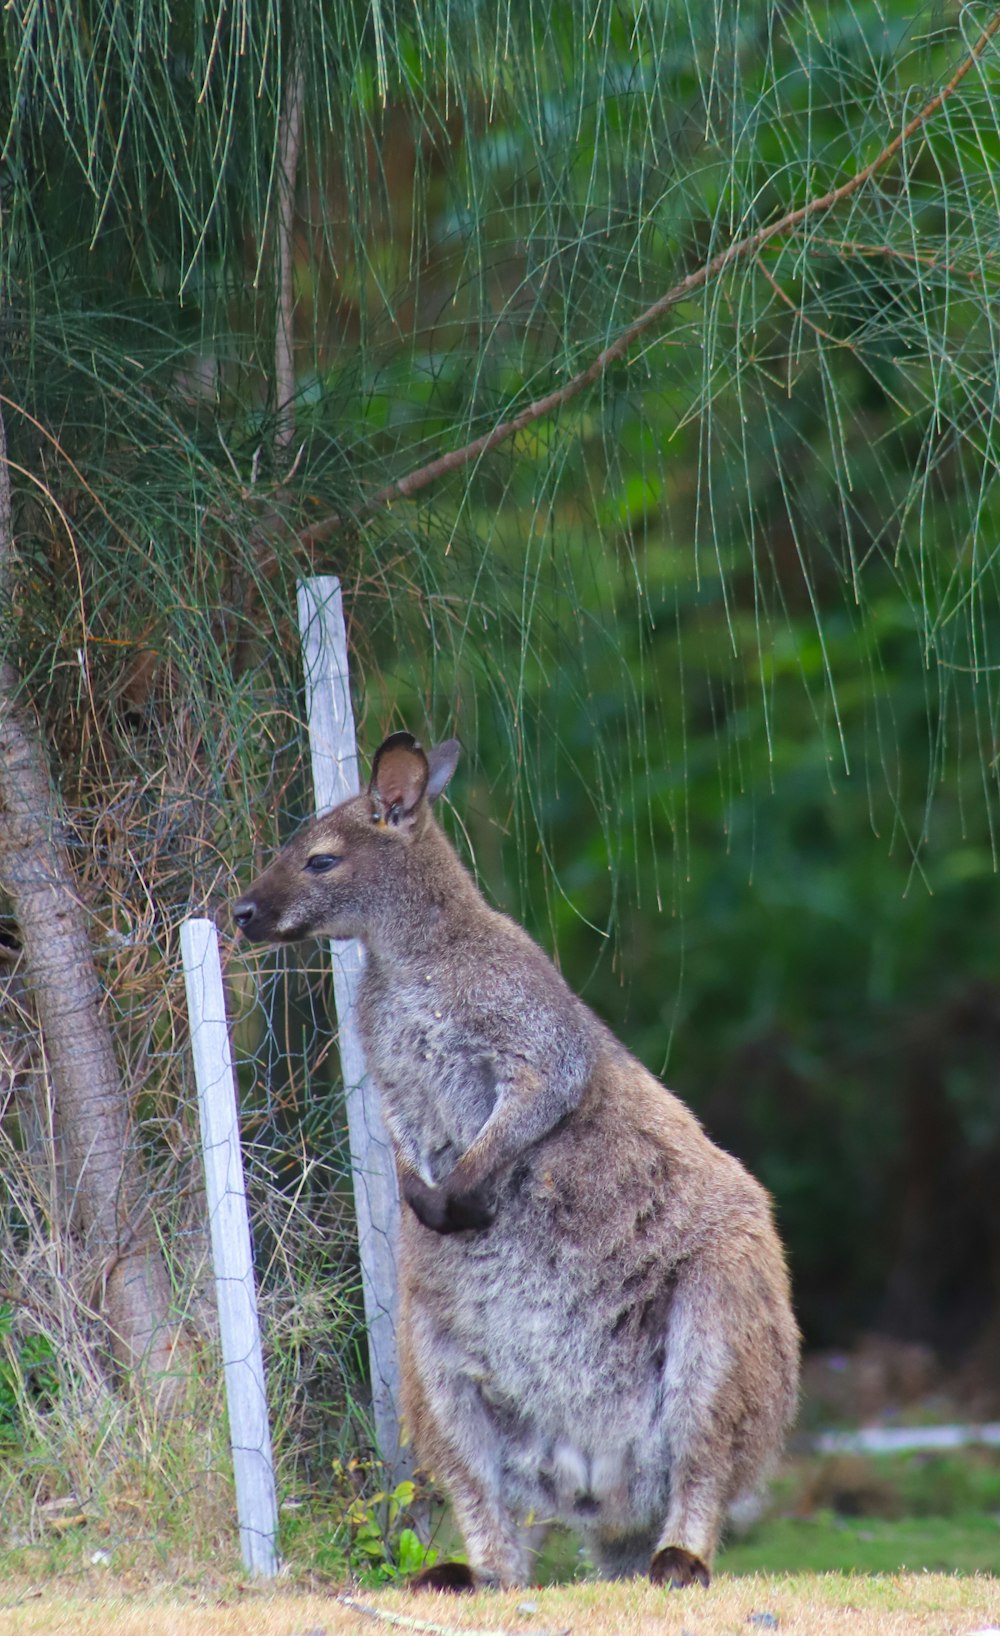 a kangaroo standing next to a wooden fence